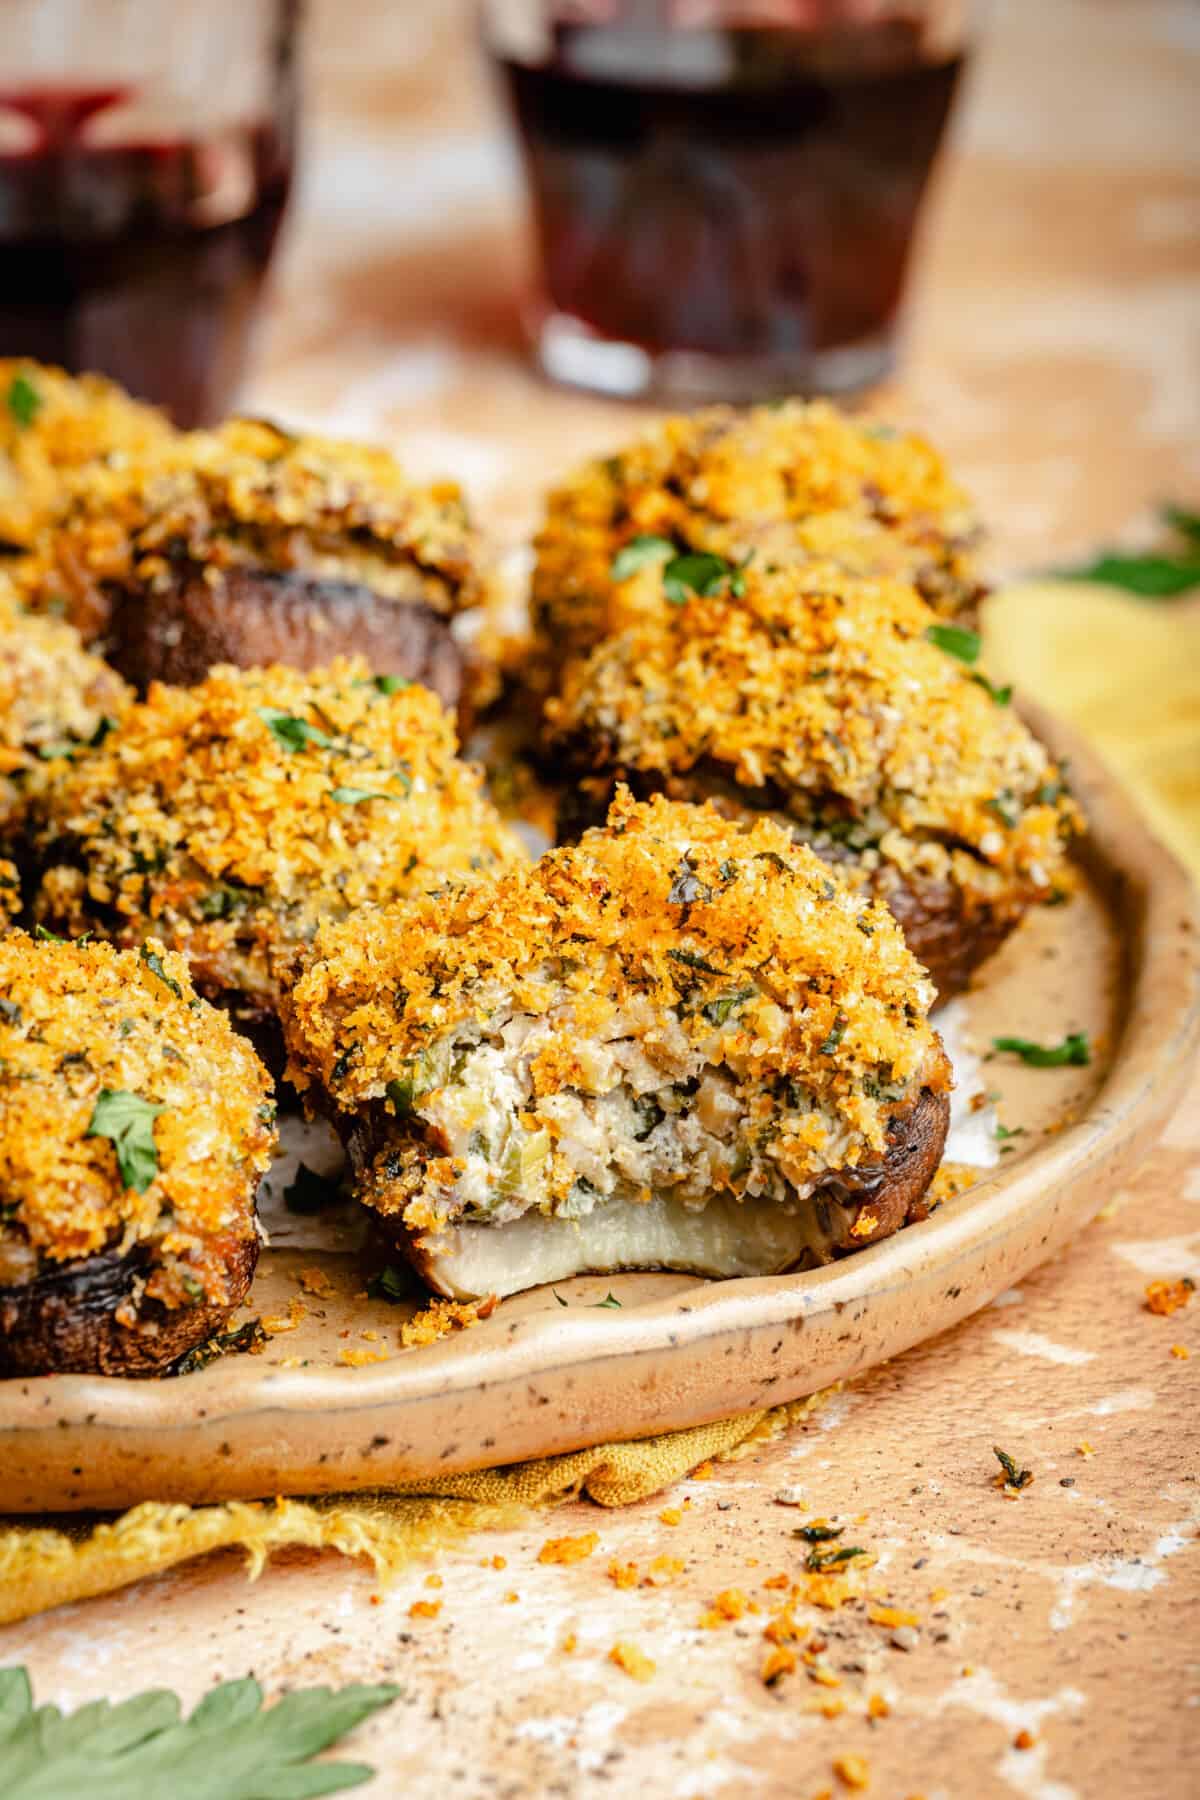 Sausage Stuffed Mushrooms on a plate. Bite taken out of one mushroom.